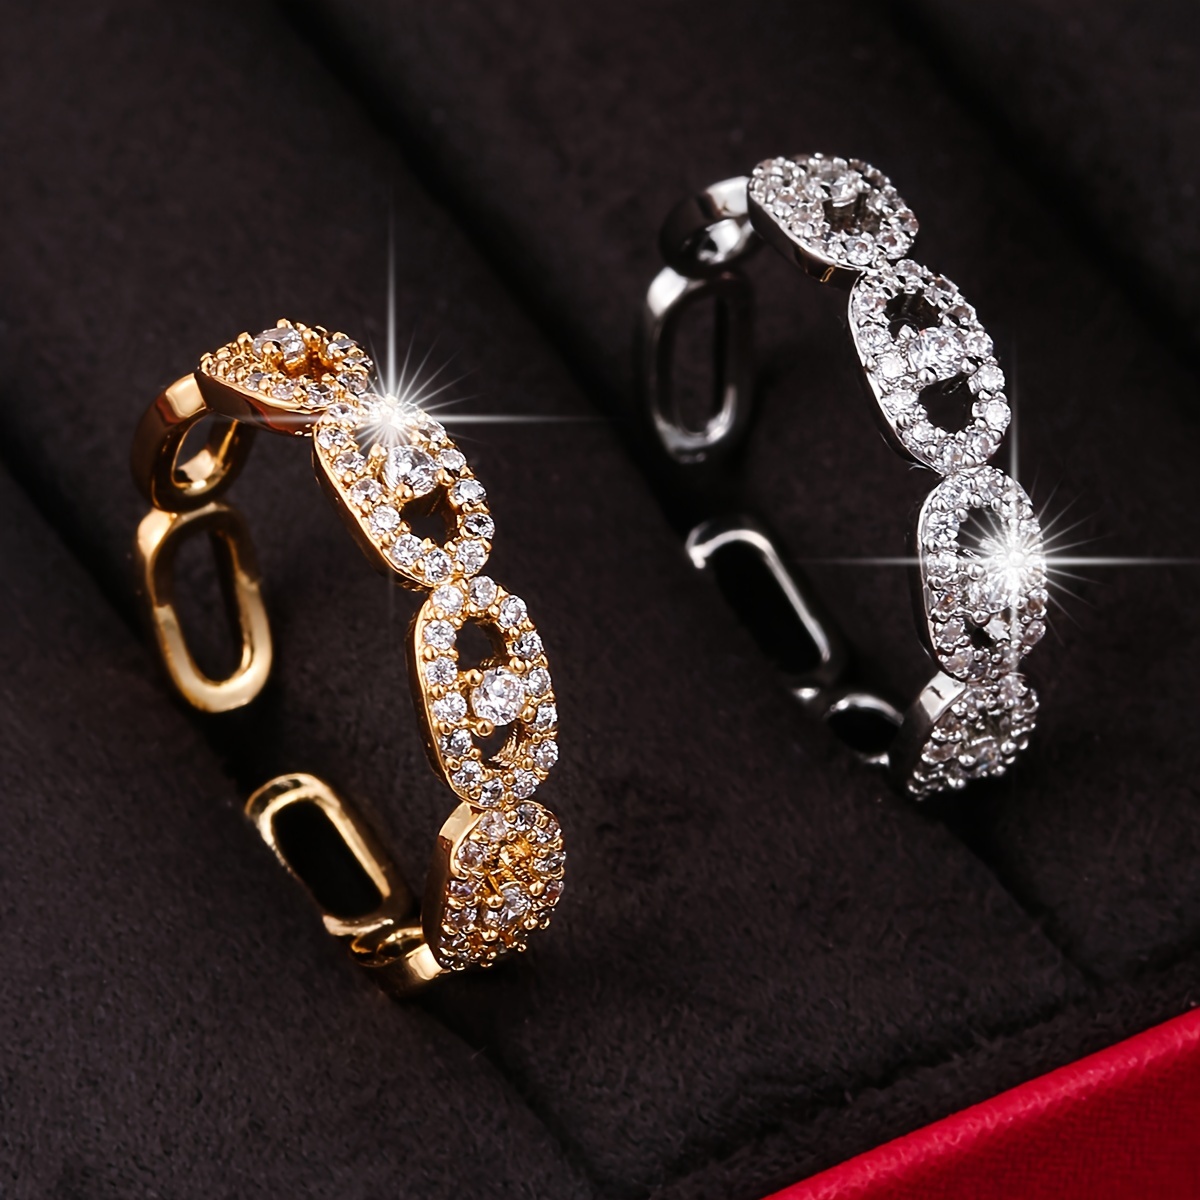 

Elegant Cuff Ring Trendy Chain Design Plated Paved Shining Zirconia Or Silvery Make Your Call Match Daily Outfits